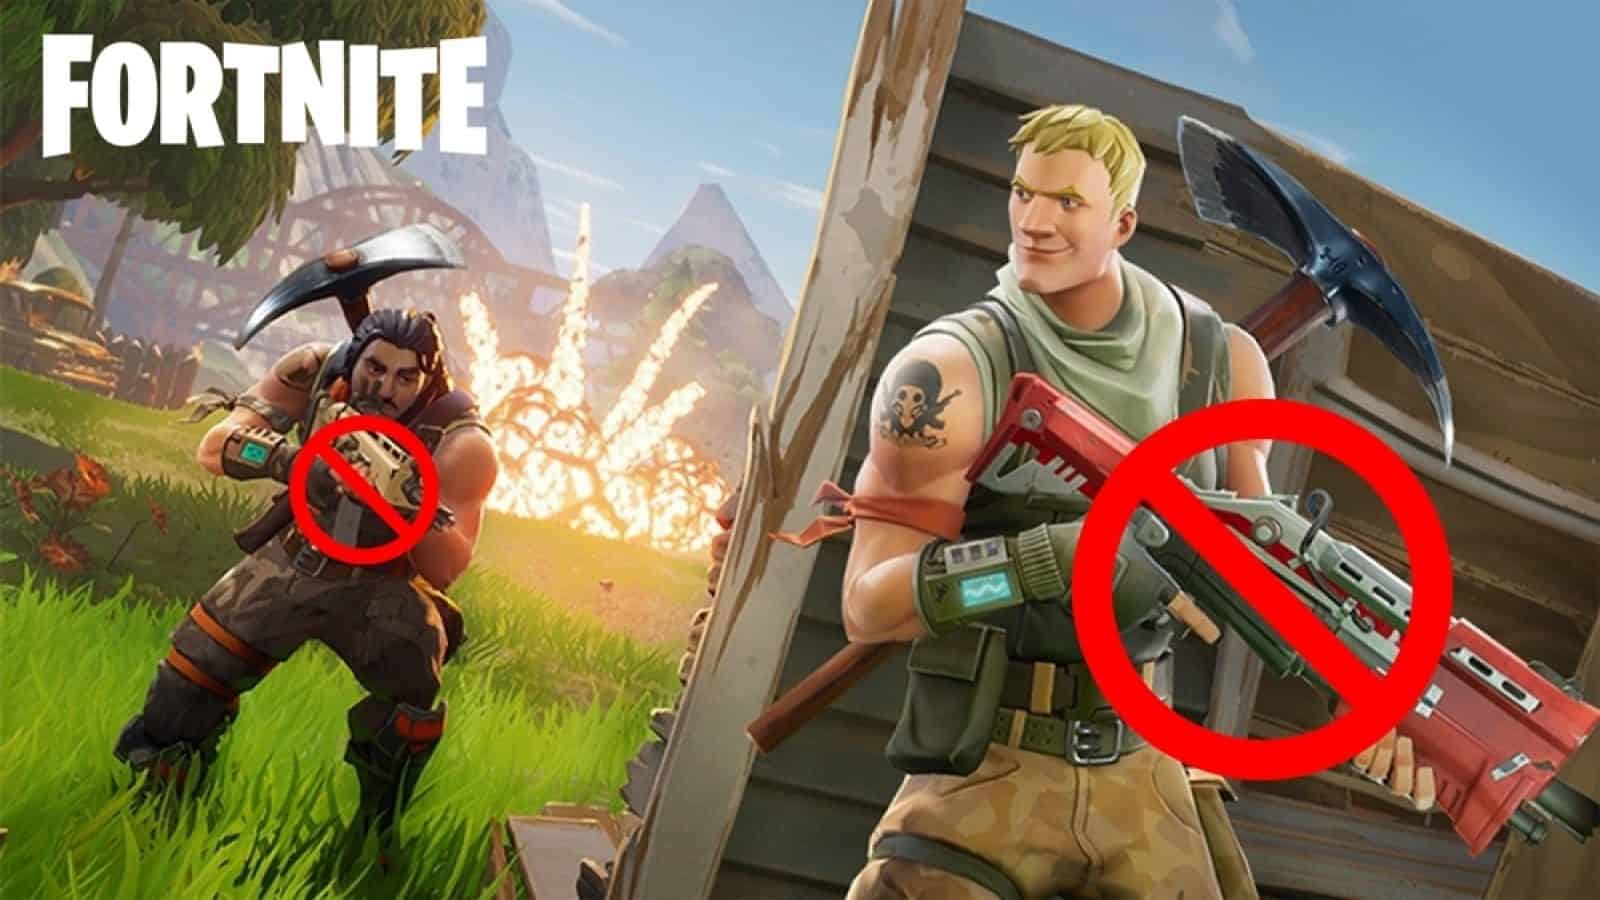 How To Tell If Someone Blocked You On Fortnite